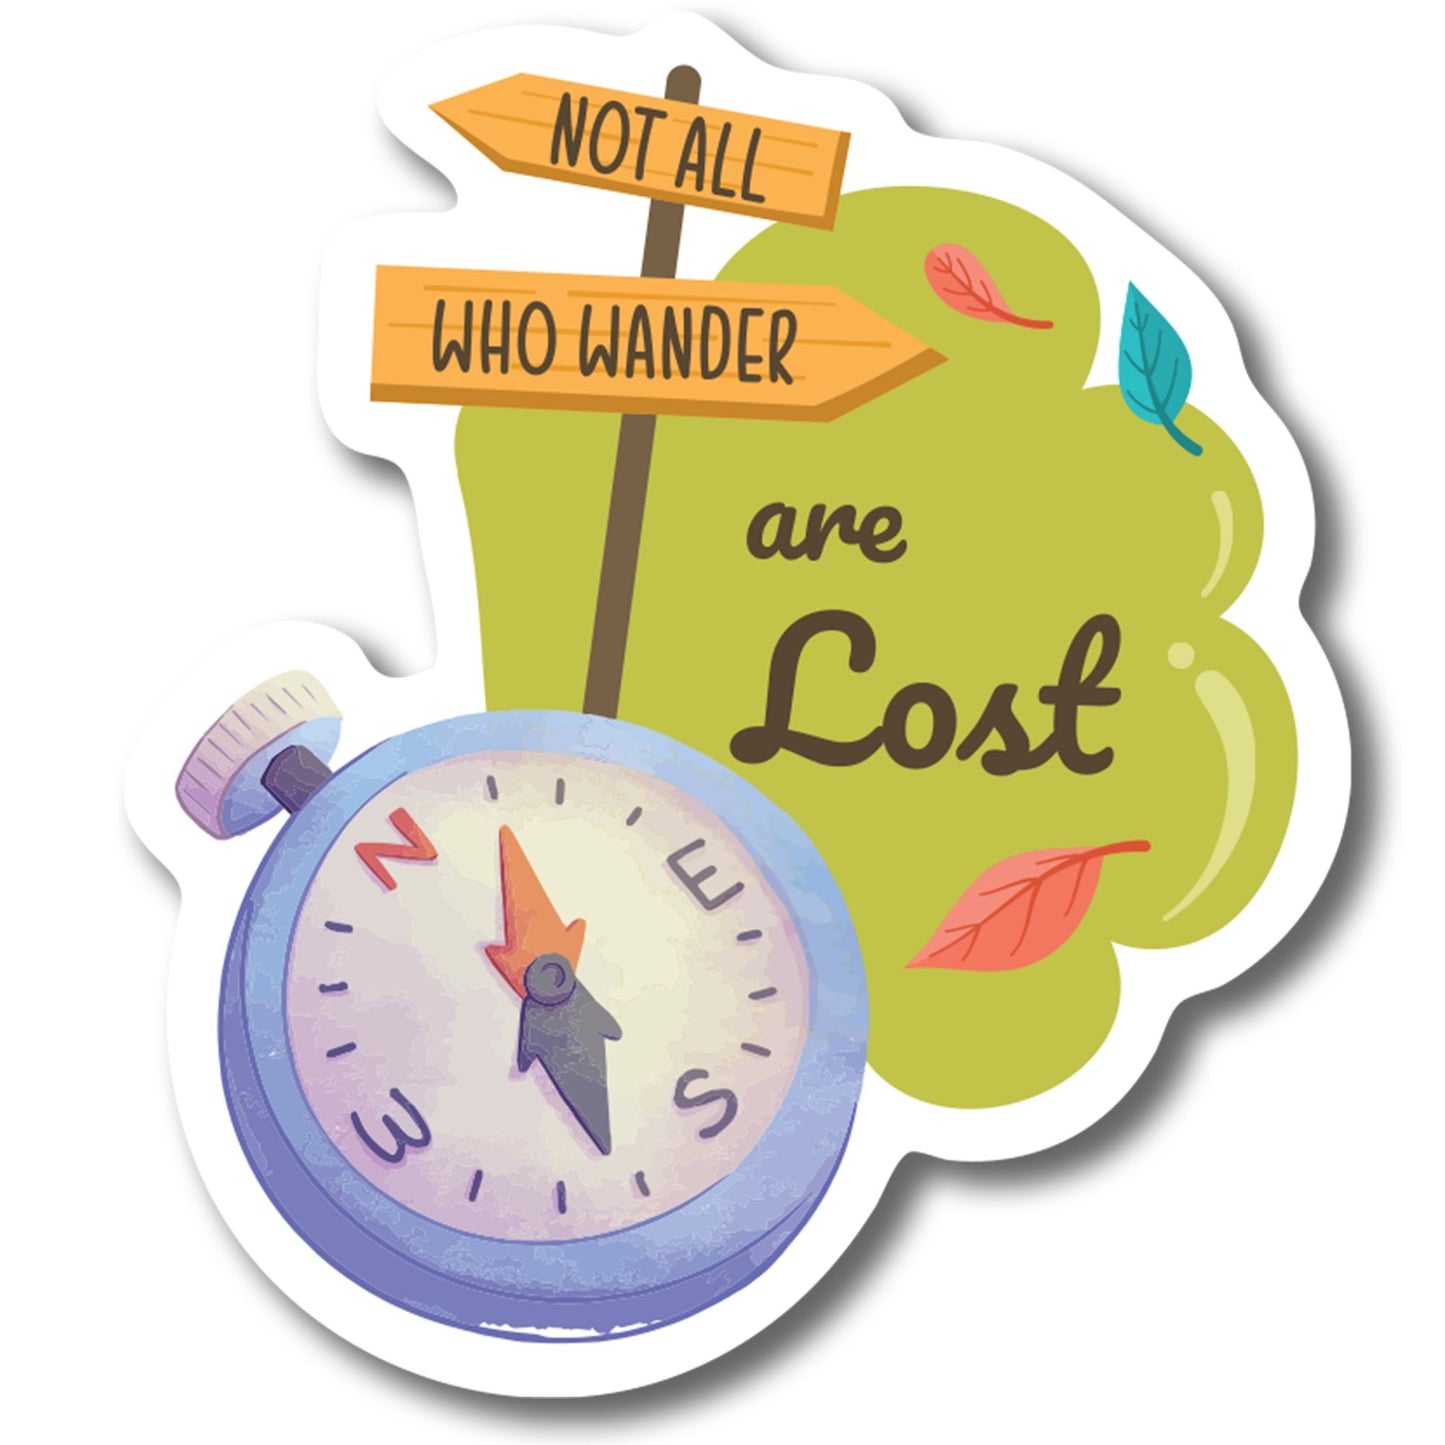 Magnet Me Up Not All Those Who Wander are Lost Magnet Decal, 4.5x5.5 inch, Automotive Magnet for Car, Great Gift or Souvenir for Those with Free Spirits and Wanderlust, Crafted in USA